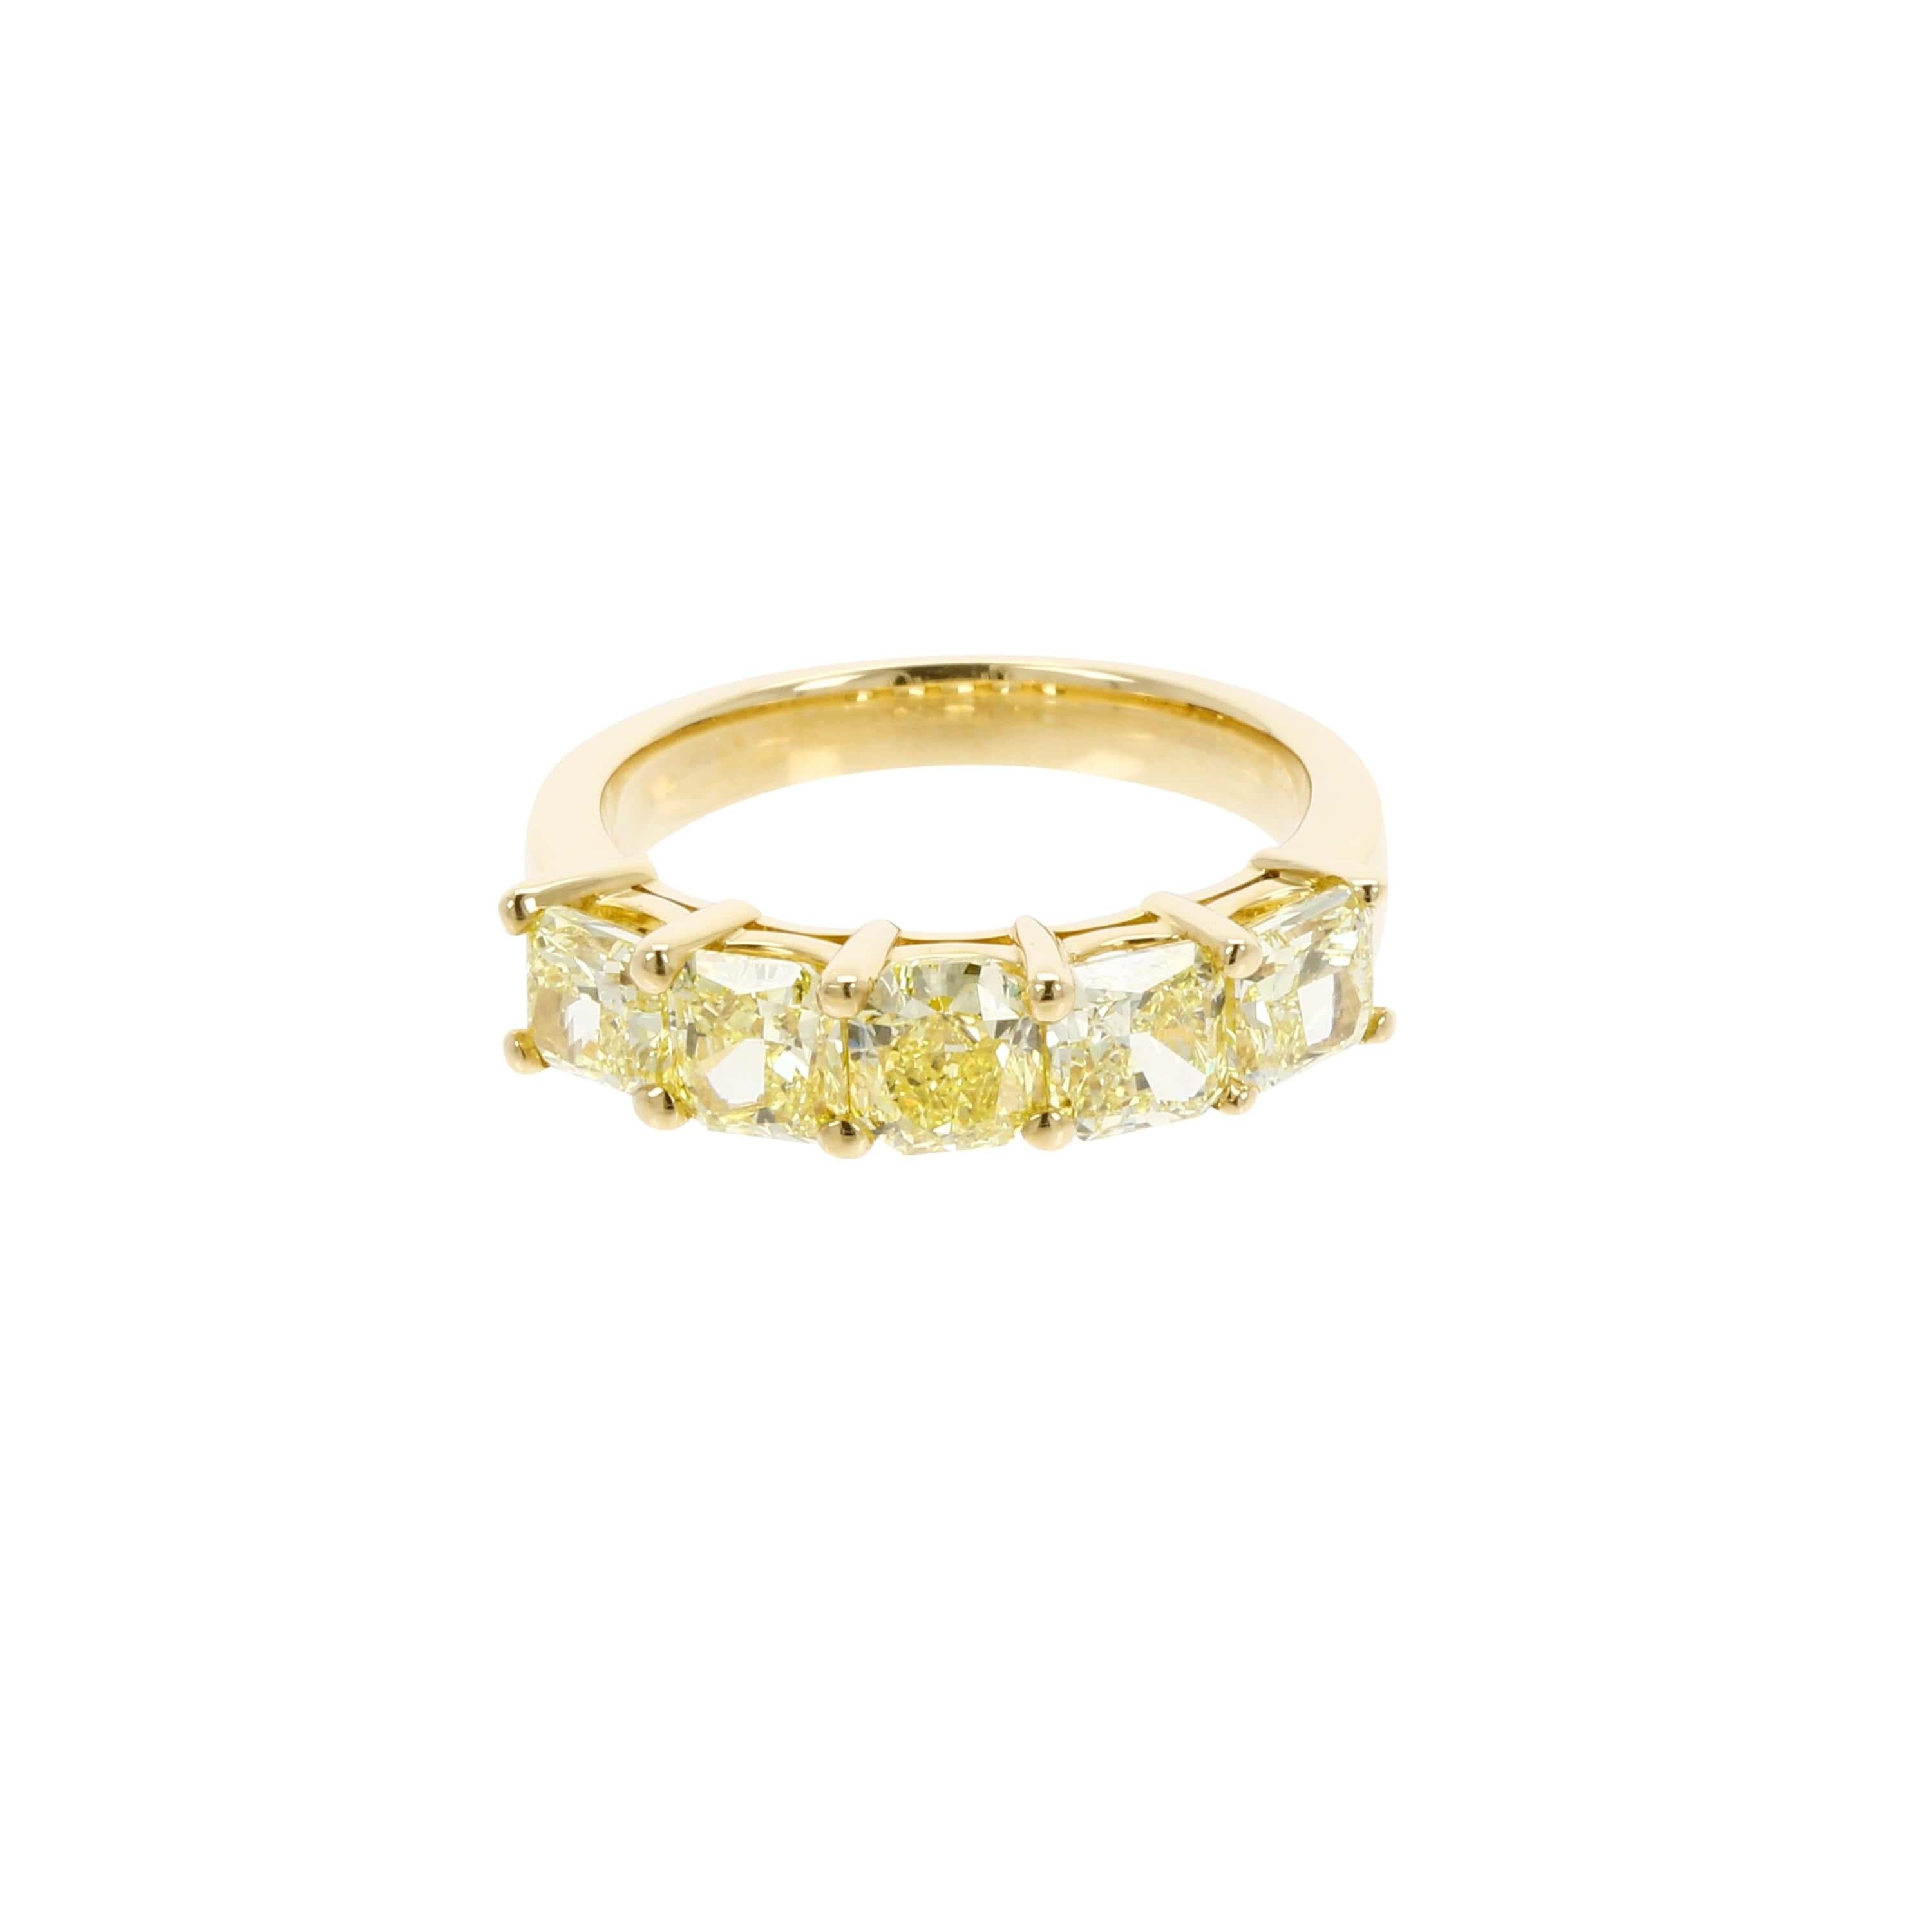 Radiant Cut 3.14 Carat Yellow Diamond Yellow Gold Eternity Band Ring For Sale